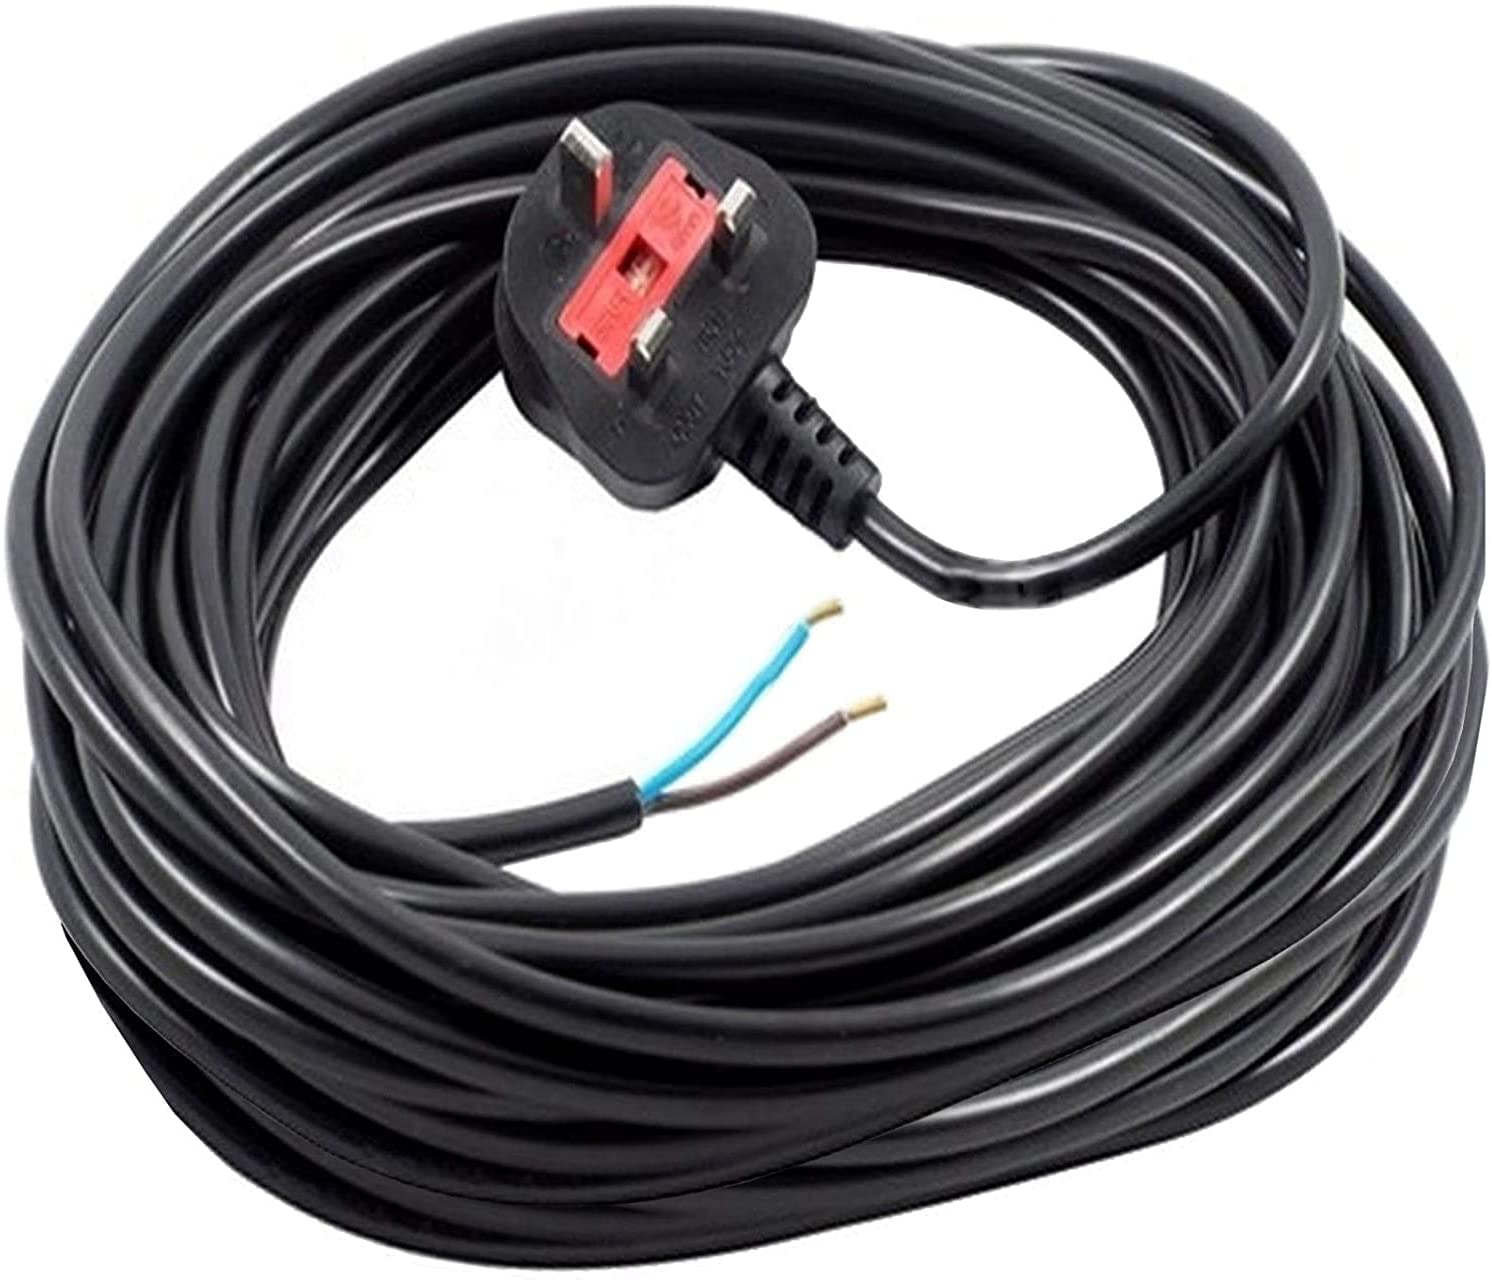 XL Extra Long 12M Metre Black Cable Mains Power Lead for SEBO Vacuum Cleaner (UK Plug)